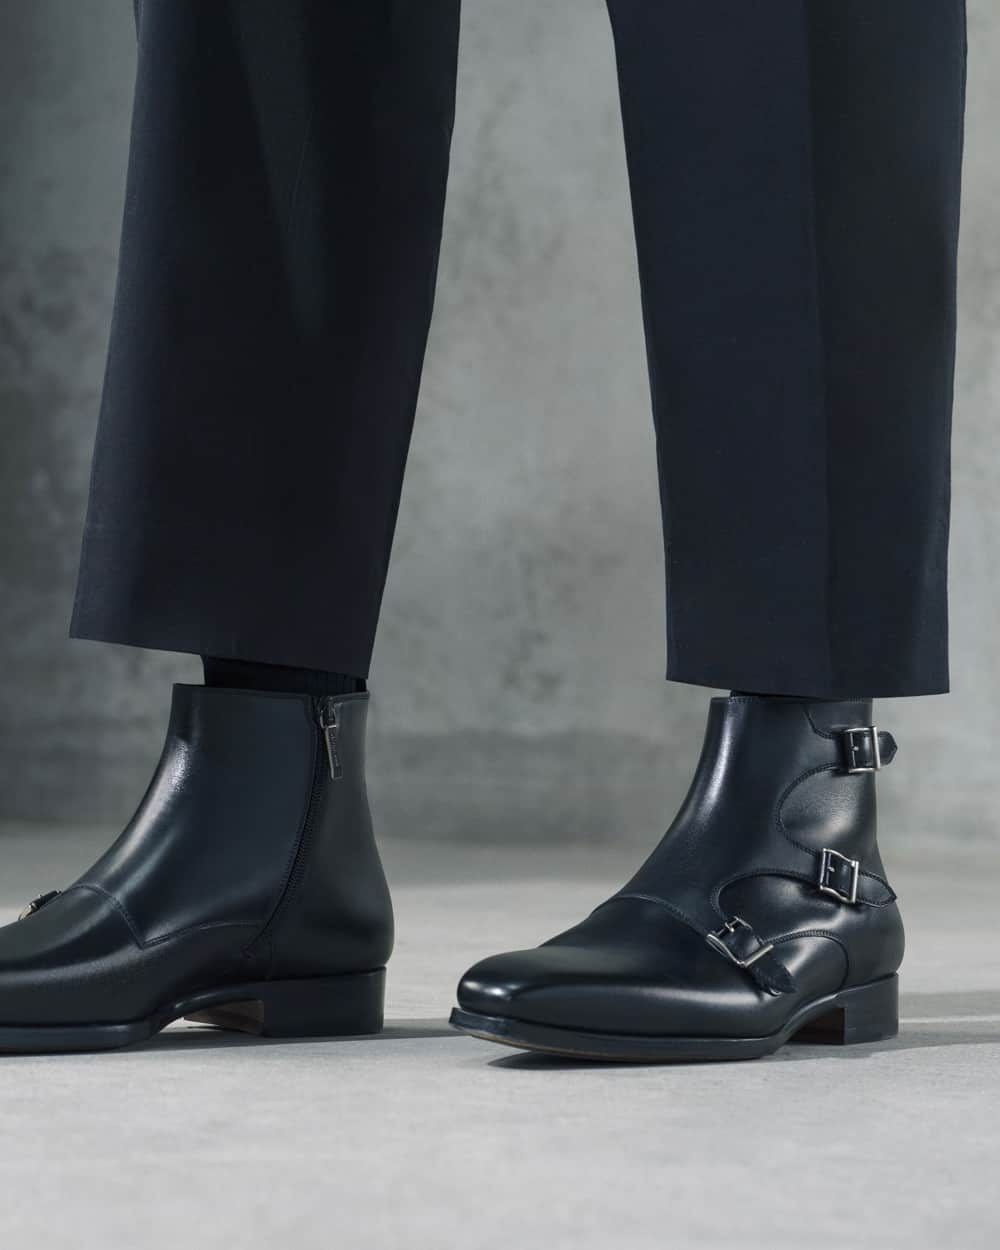 A pair of men's Magnanni black triple buckle Chelsea boots worn on feet with cropped black pants